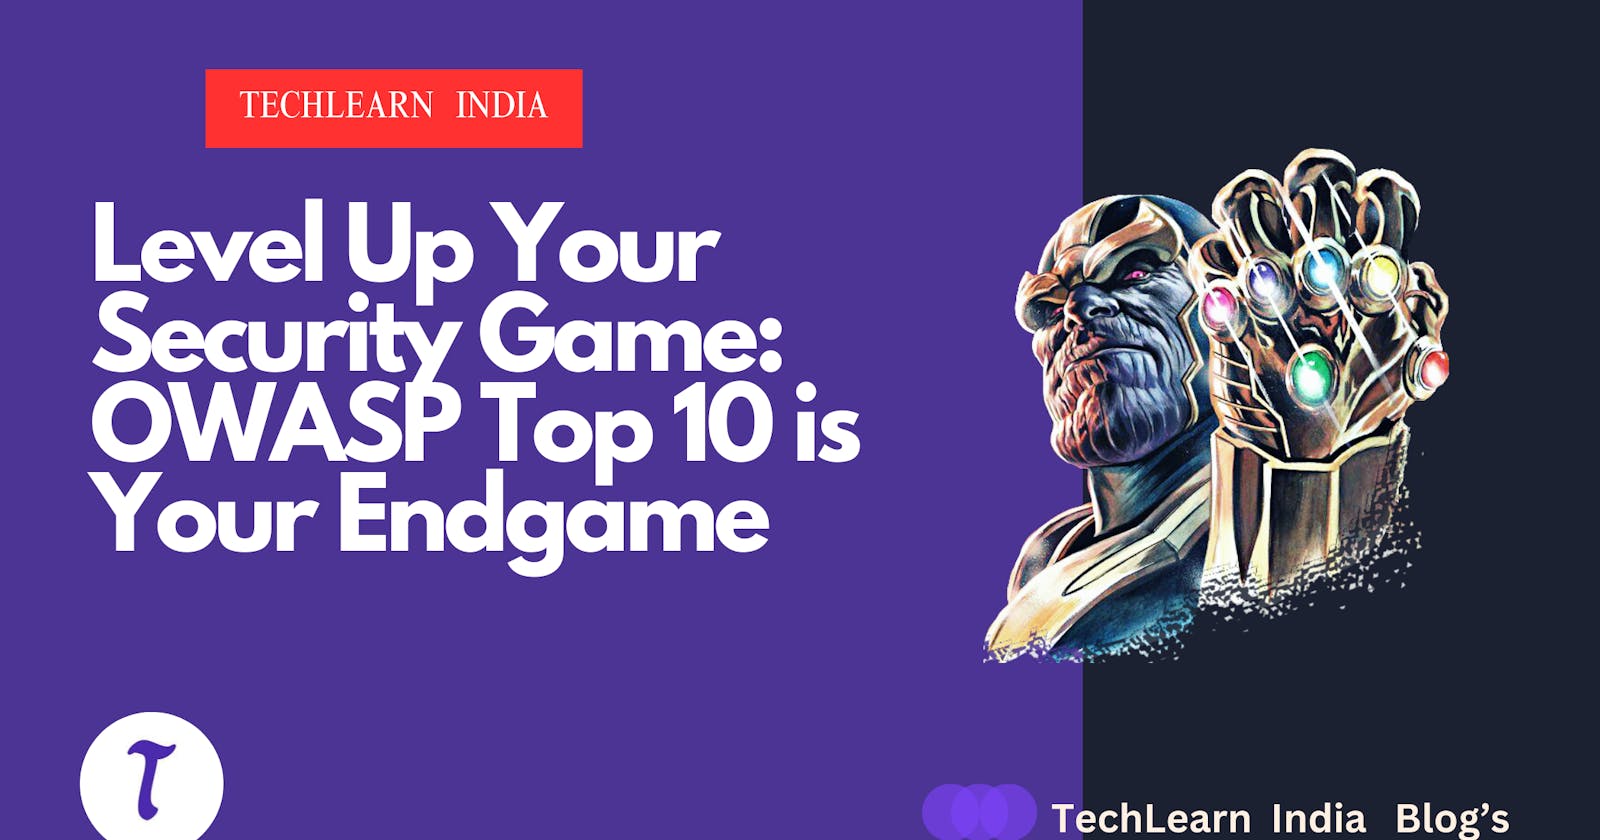 Level Up Your Security Game: OWASP Top 10 is Your Endgame